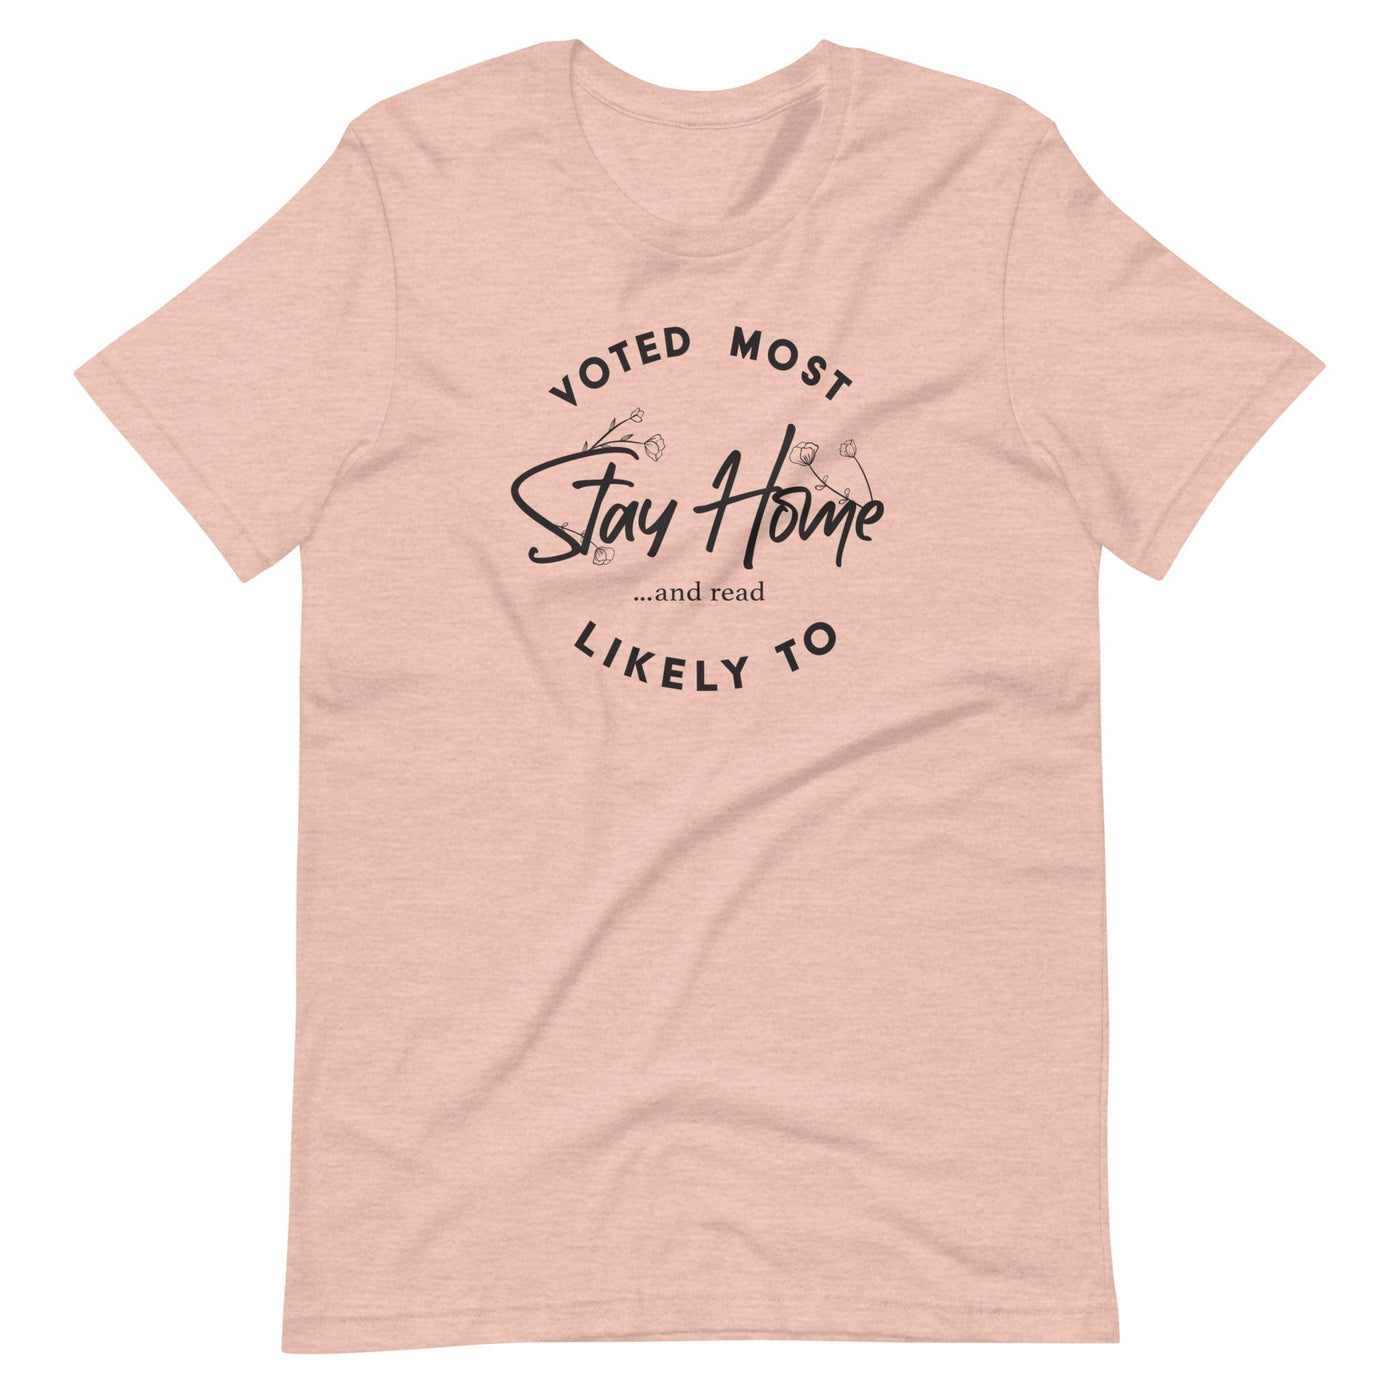 Lit Haven Booktique T-Shirt Heather Prism Peach / XS Voted Most Likely to Stay Home & Read